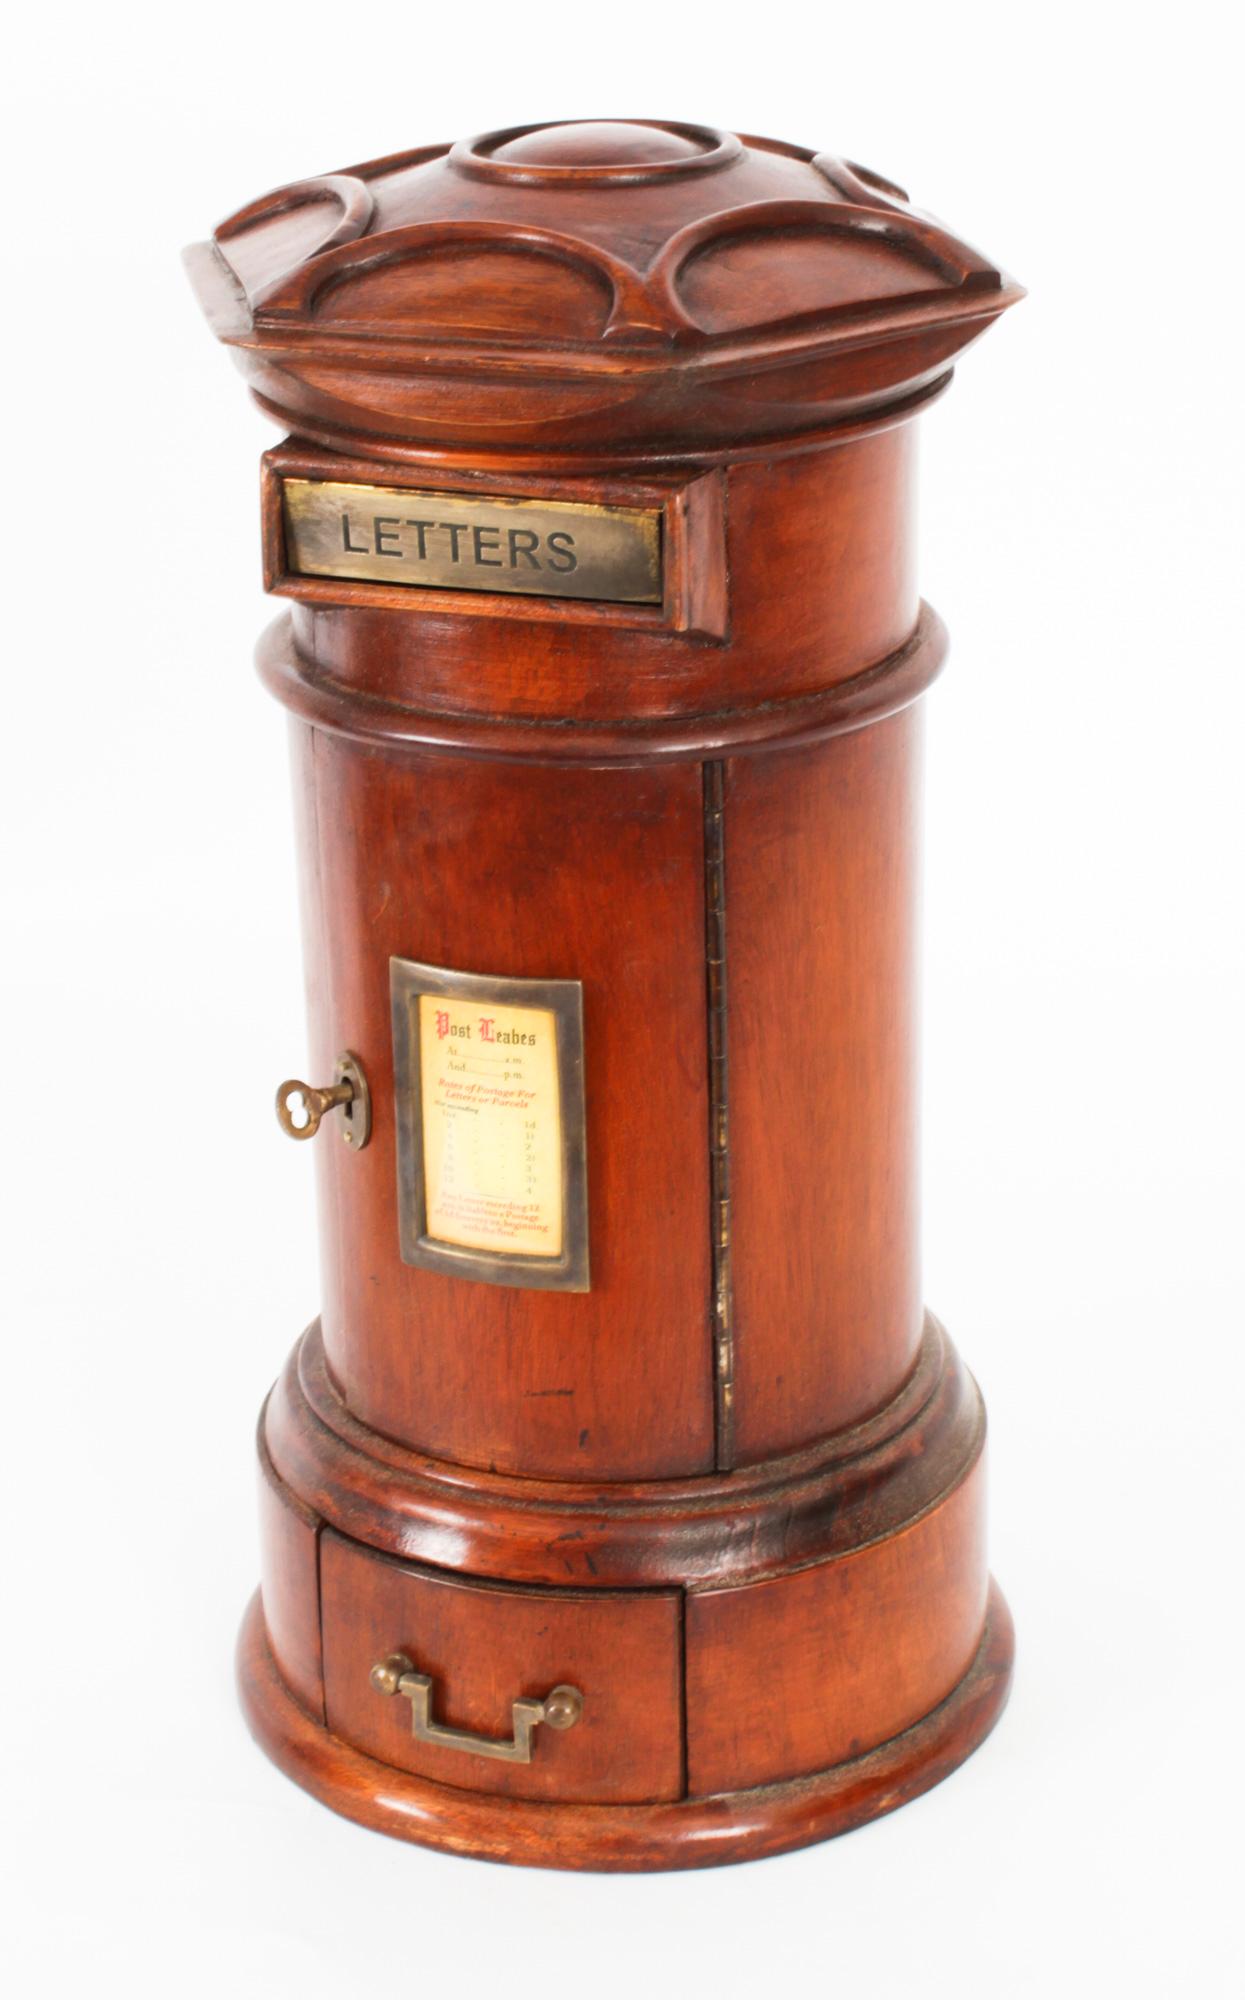 This is a beautiful vintage Country House Pillar Post Letter Box, dating from the second half of the 20th century.

The solid walnut country house pillar post letter box is cylinder shaped and features a hexagonal shaped top with a brass posting